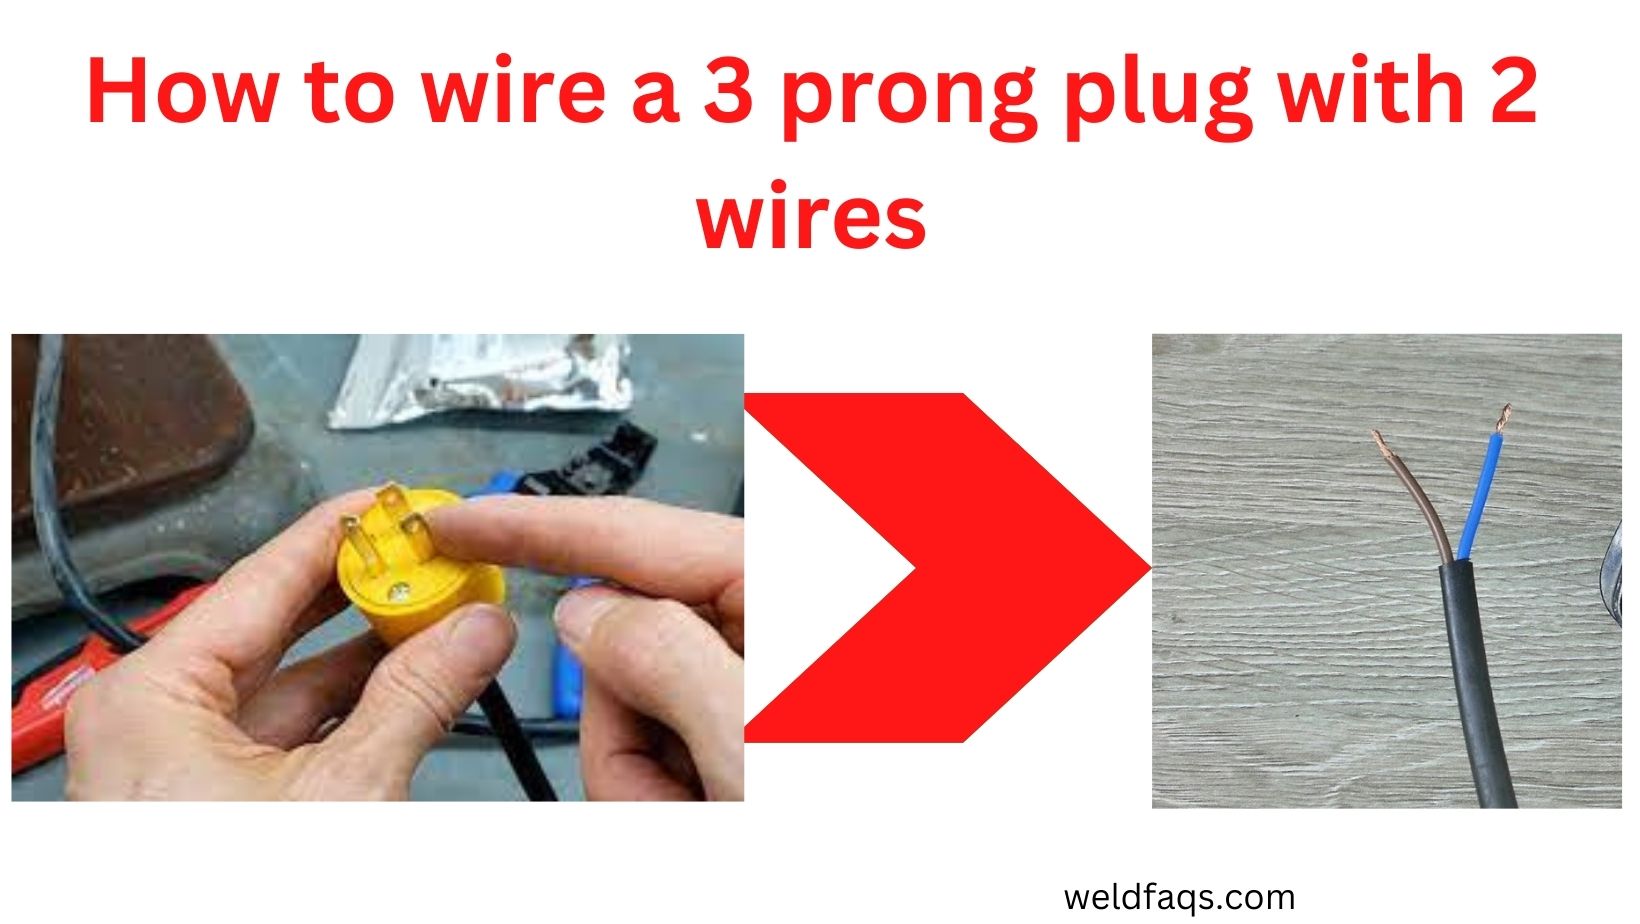 how to wire a 3 prong plug with 2 wires